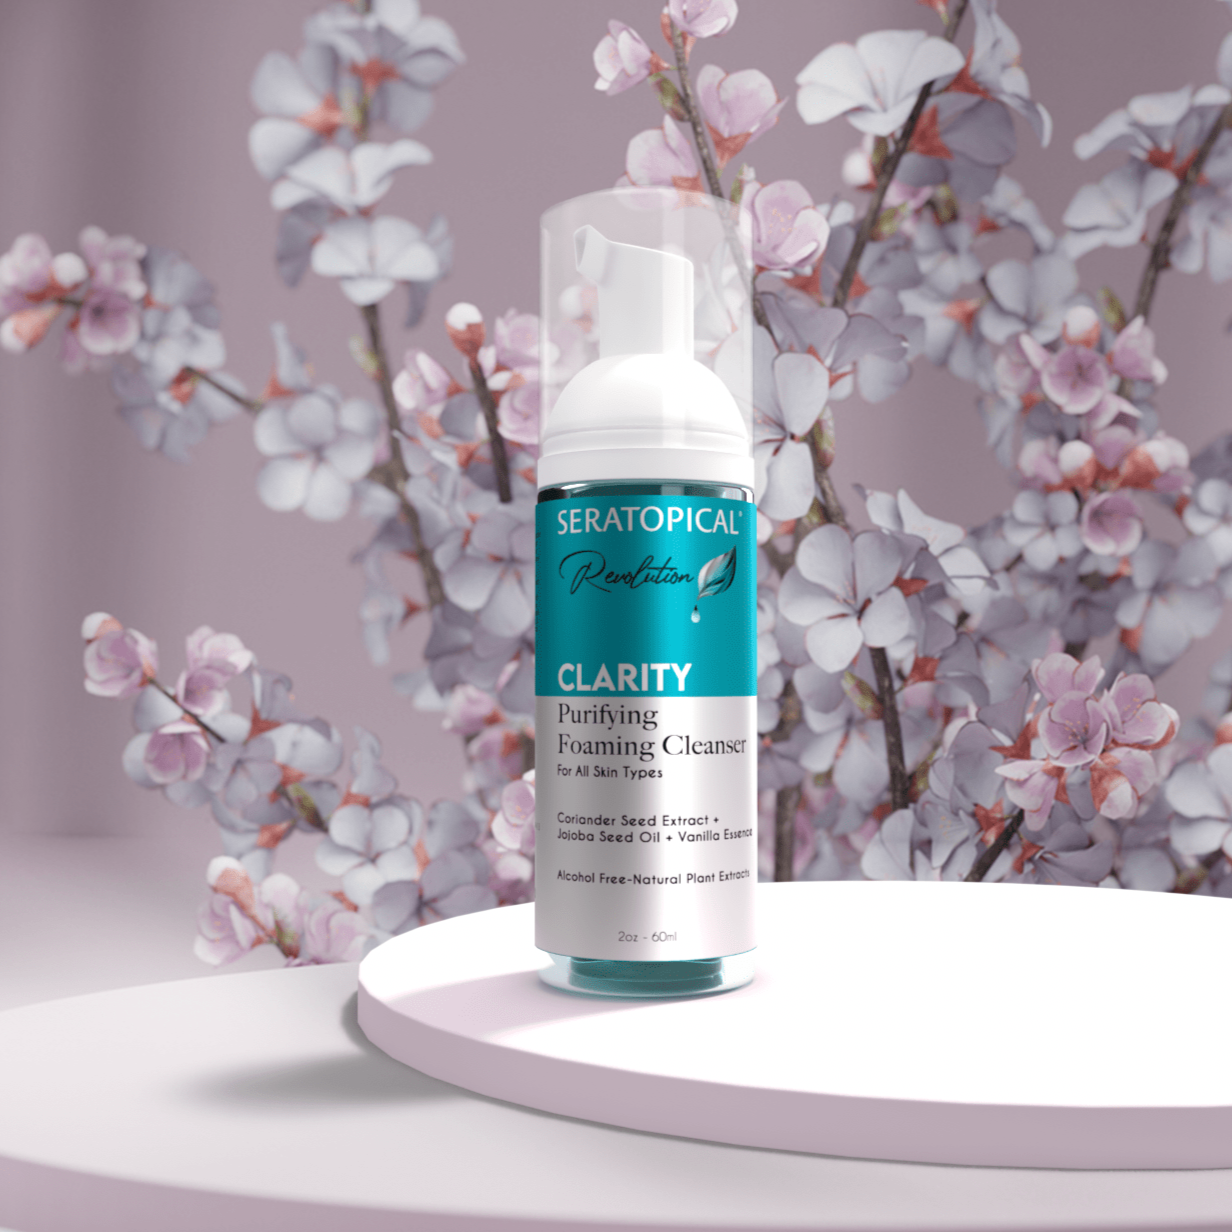 Seratopical Revolution Clarity Purifying Foaming Cleanser in front of flowers